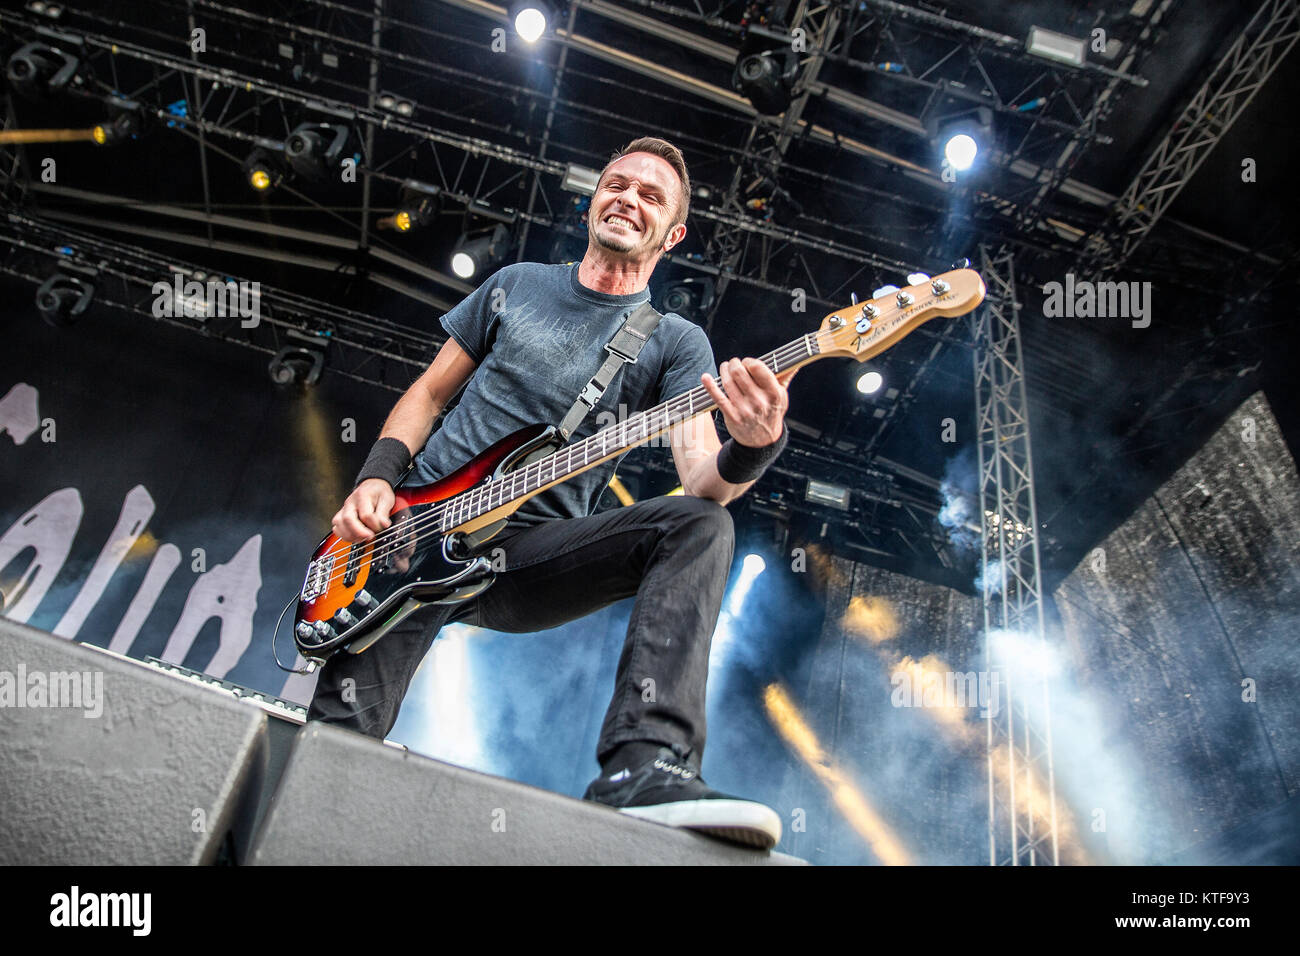 The French death metal band Gojira performs a live concert at the Norwegian  music festival Tons of Rock 2015. Here bass player Jean-Michel Labadie is  seen live on stage. Norway, 19/06 2015